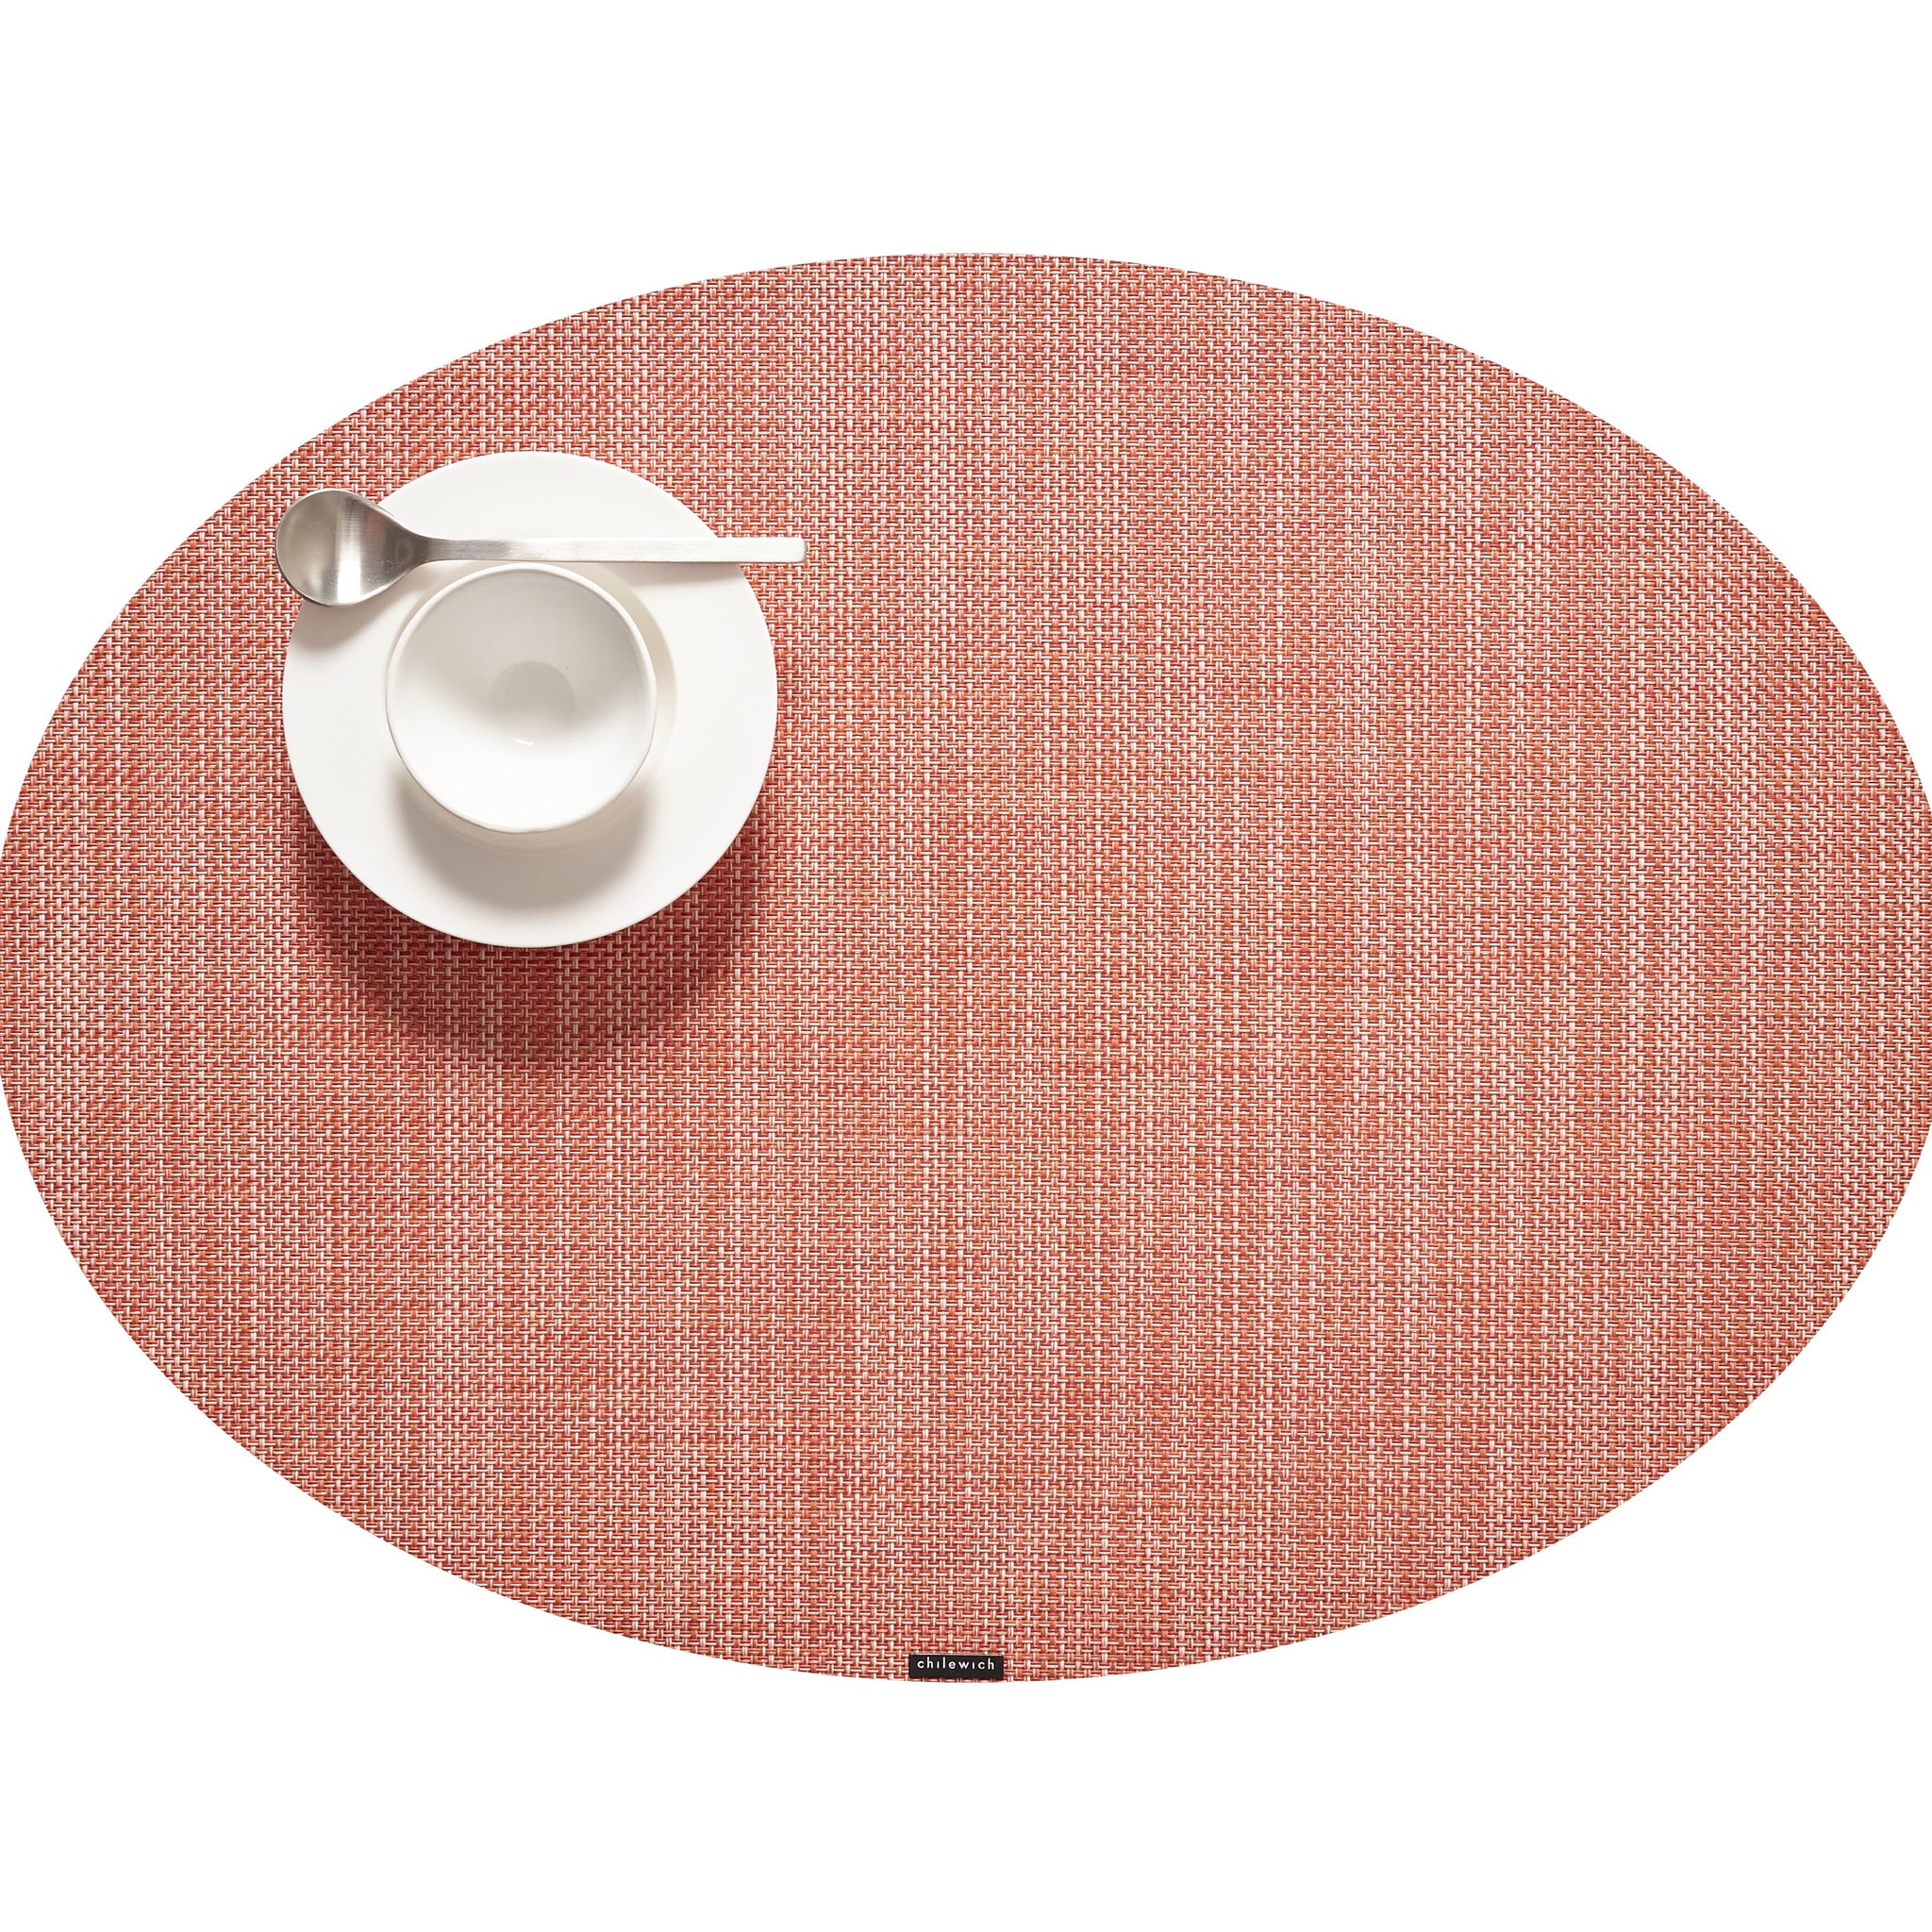 Chilewich Placemat - Mini Basketweave - Clay